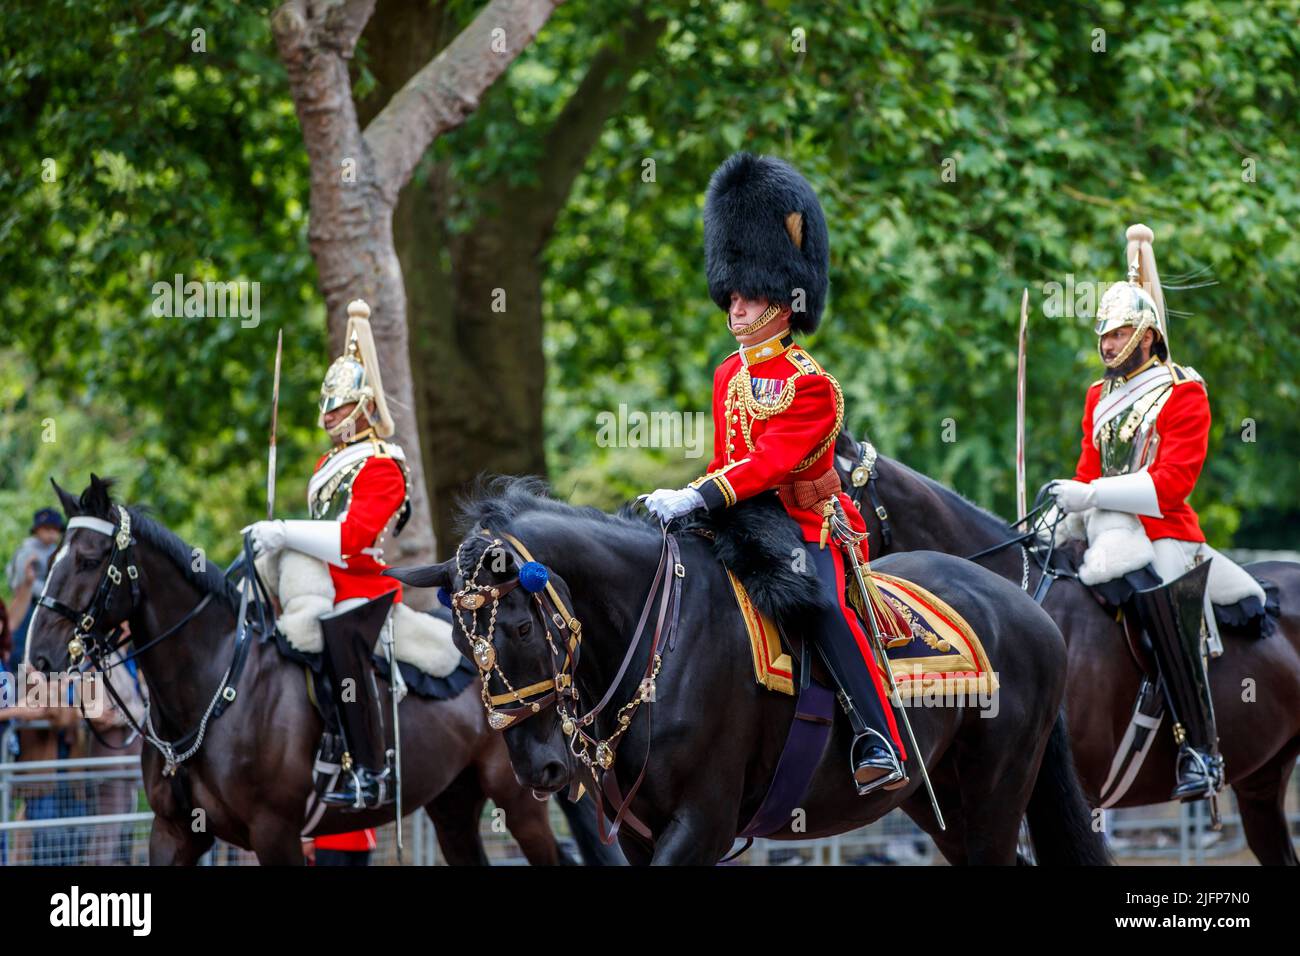 Oberstleutnant J Shaw bei Trooping the Color, Colonel’s Review in der Mall, London, England, Großbritannien, am Samstag, den 28. Mai 2022. Stockfoto